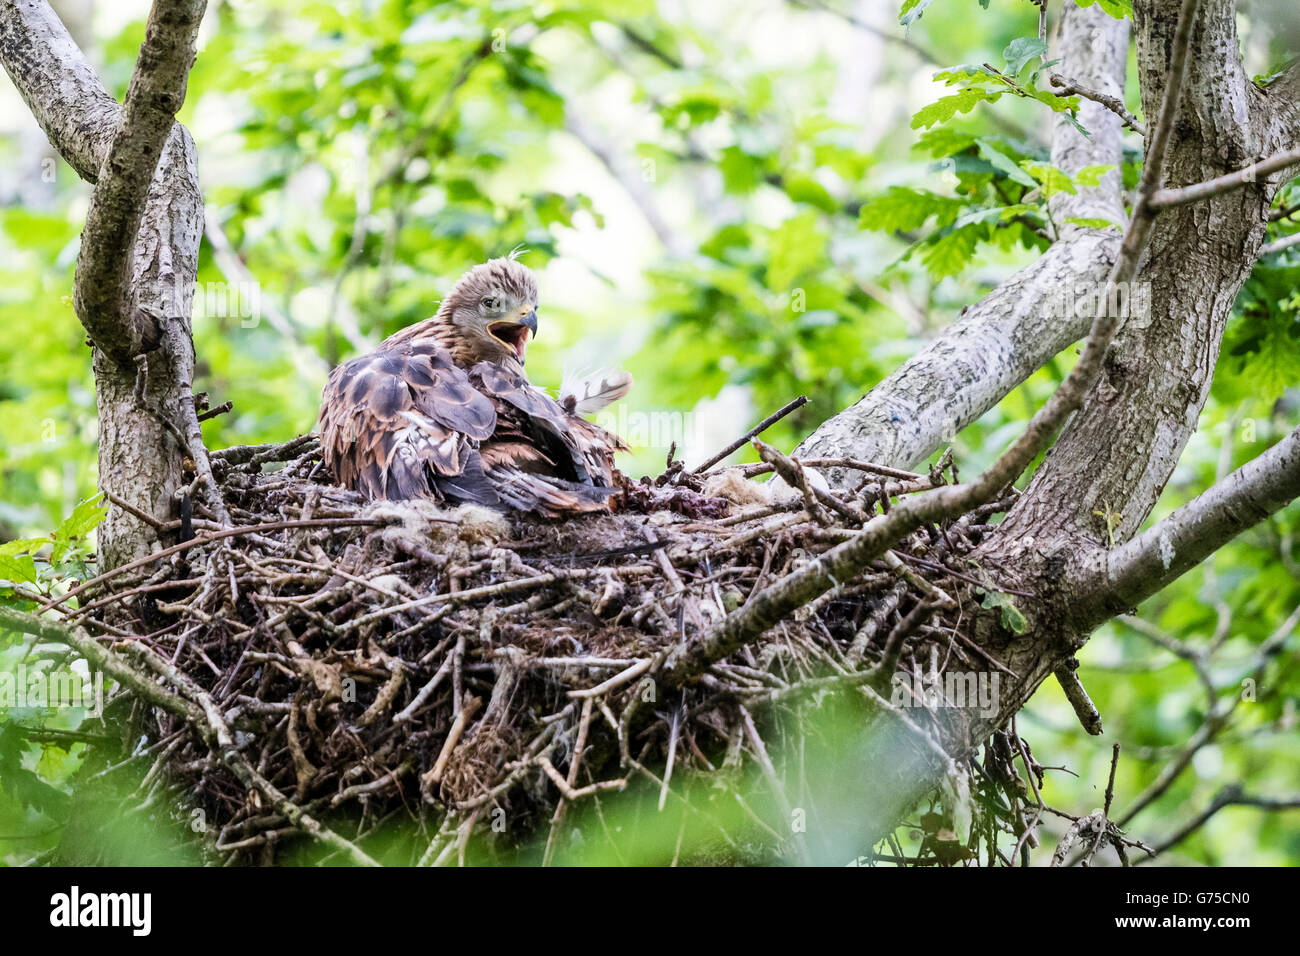 A red kite (Milvus milvus) chick in the verge of fledging (branching out) in a springtime Welsh woodland. Stock Photo